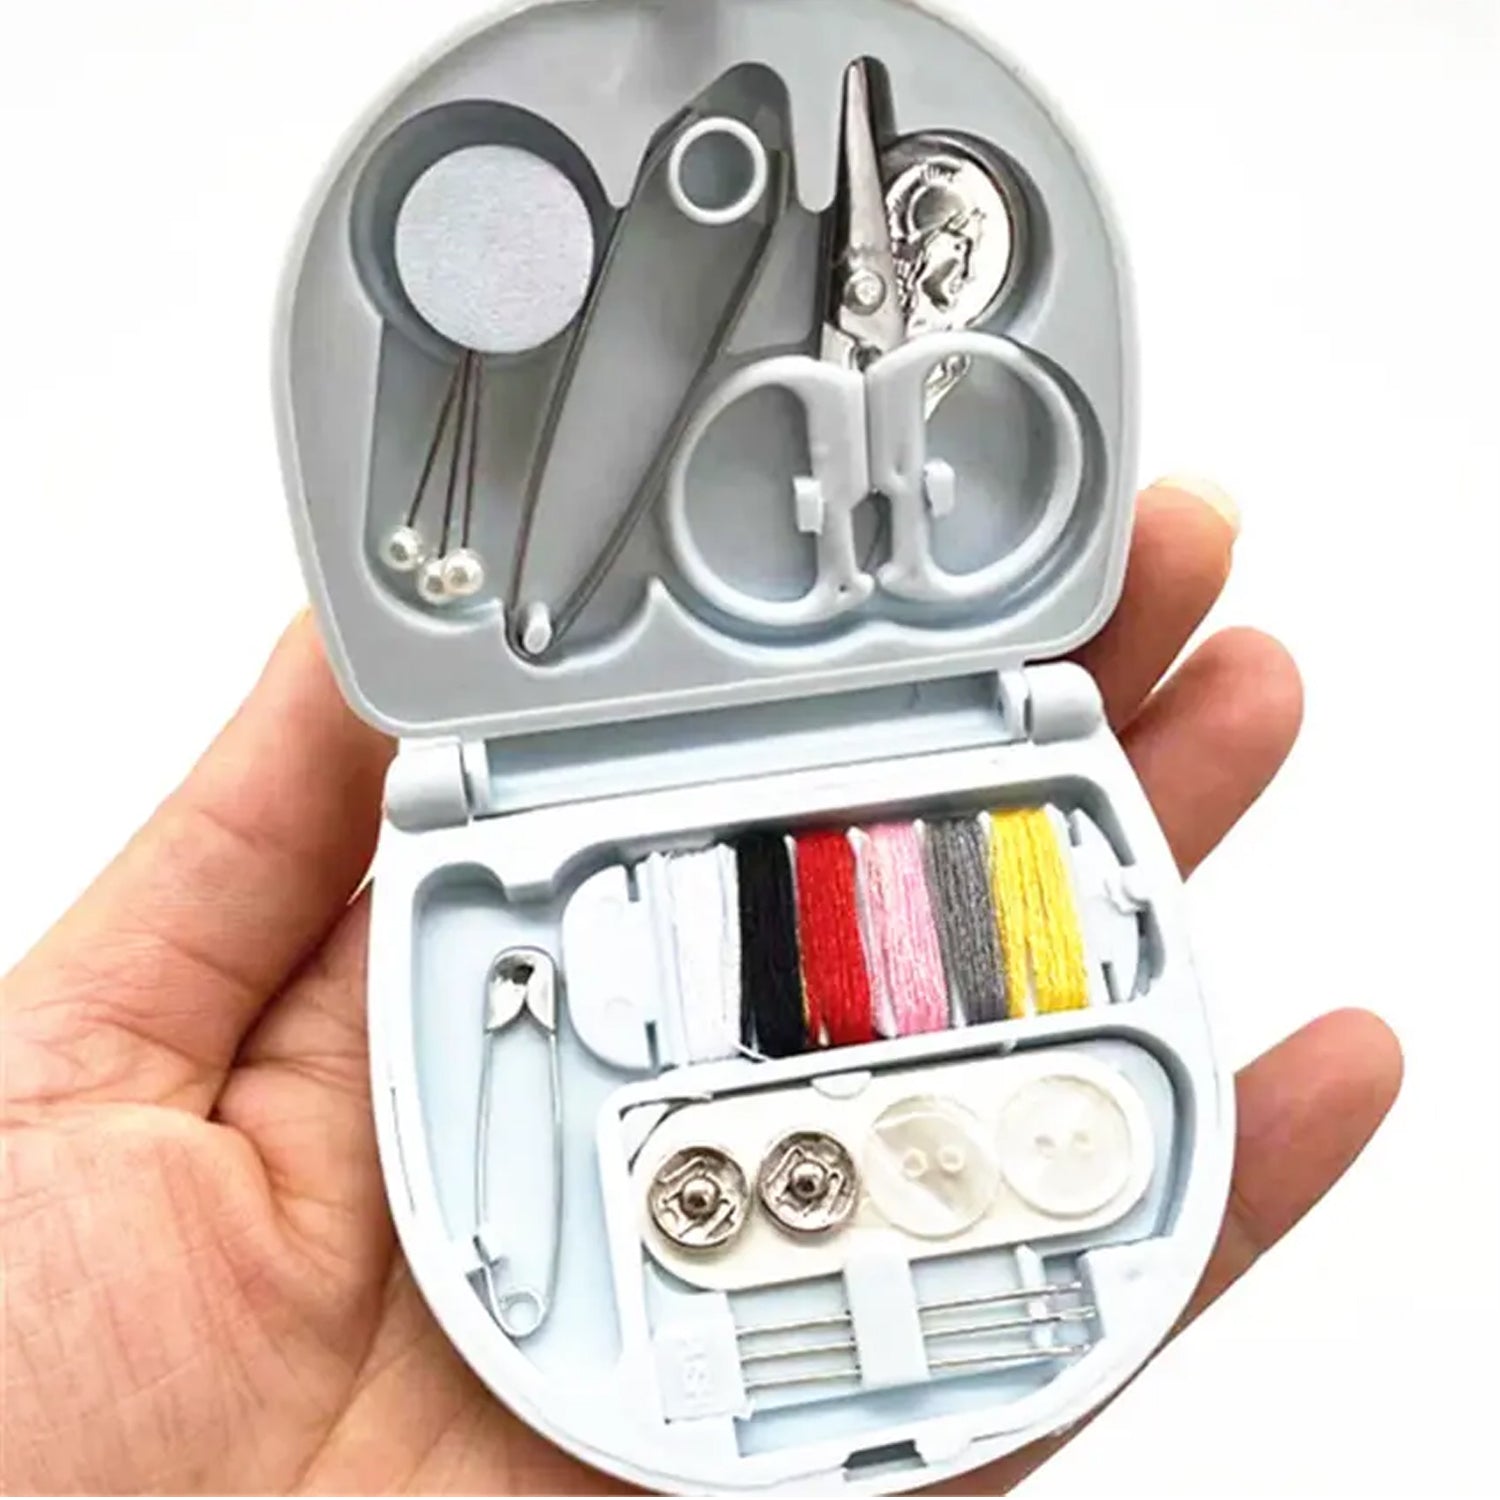 KALIONE Travel Sewing Kit, Mini Travel Sewing Kit for Adults, Portable  Sewing Kit Box Plastic Sewing Tool Kits with Needle Sewing Thread  Accessories